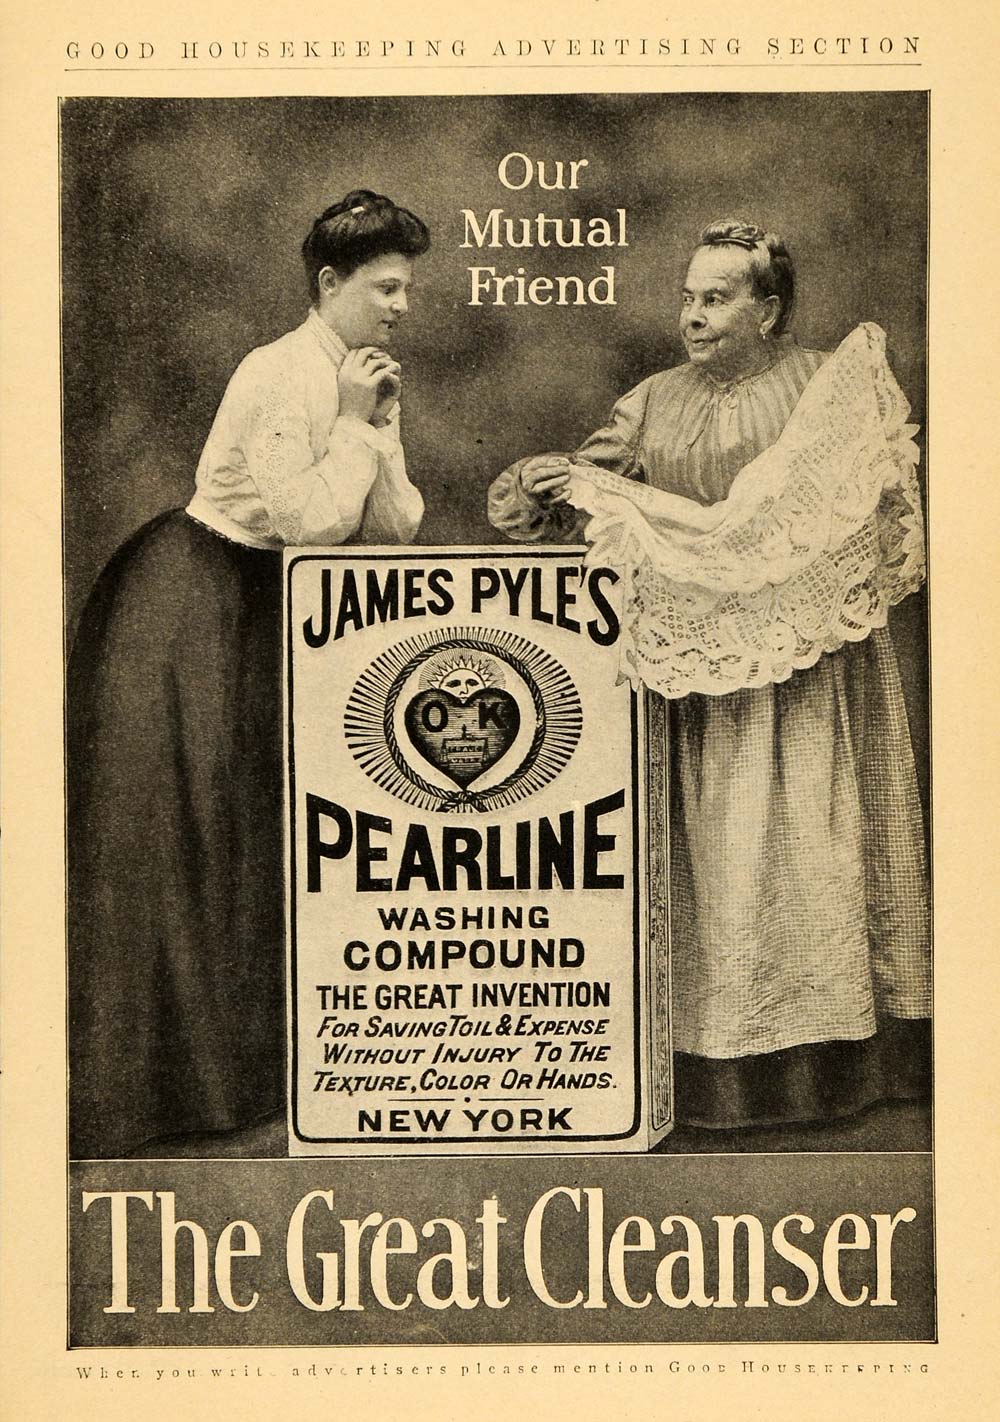 1905 Ad James Pyle's Pearline Washing Compound Cleanser - ORIGINAL GH2